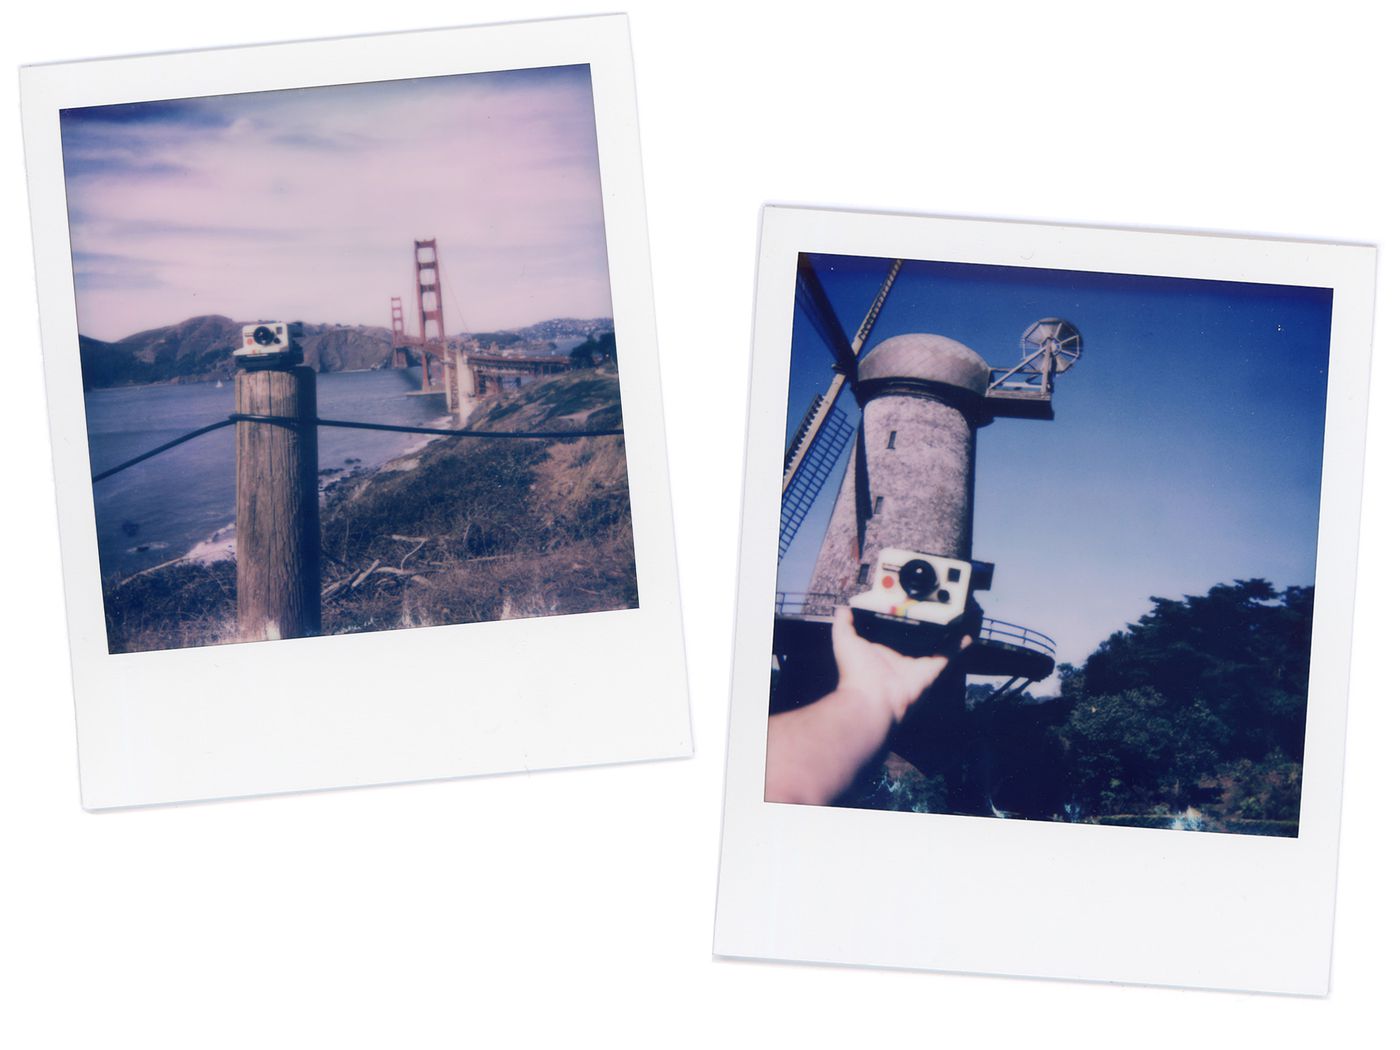 We shot some actual Polaroids of the Lego Polaroid with the Polaroid camera that it’s based on. Here it is in front of the Golden Gate Bridge in San Francisco and the historic Dutch Windmill.